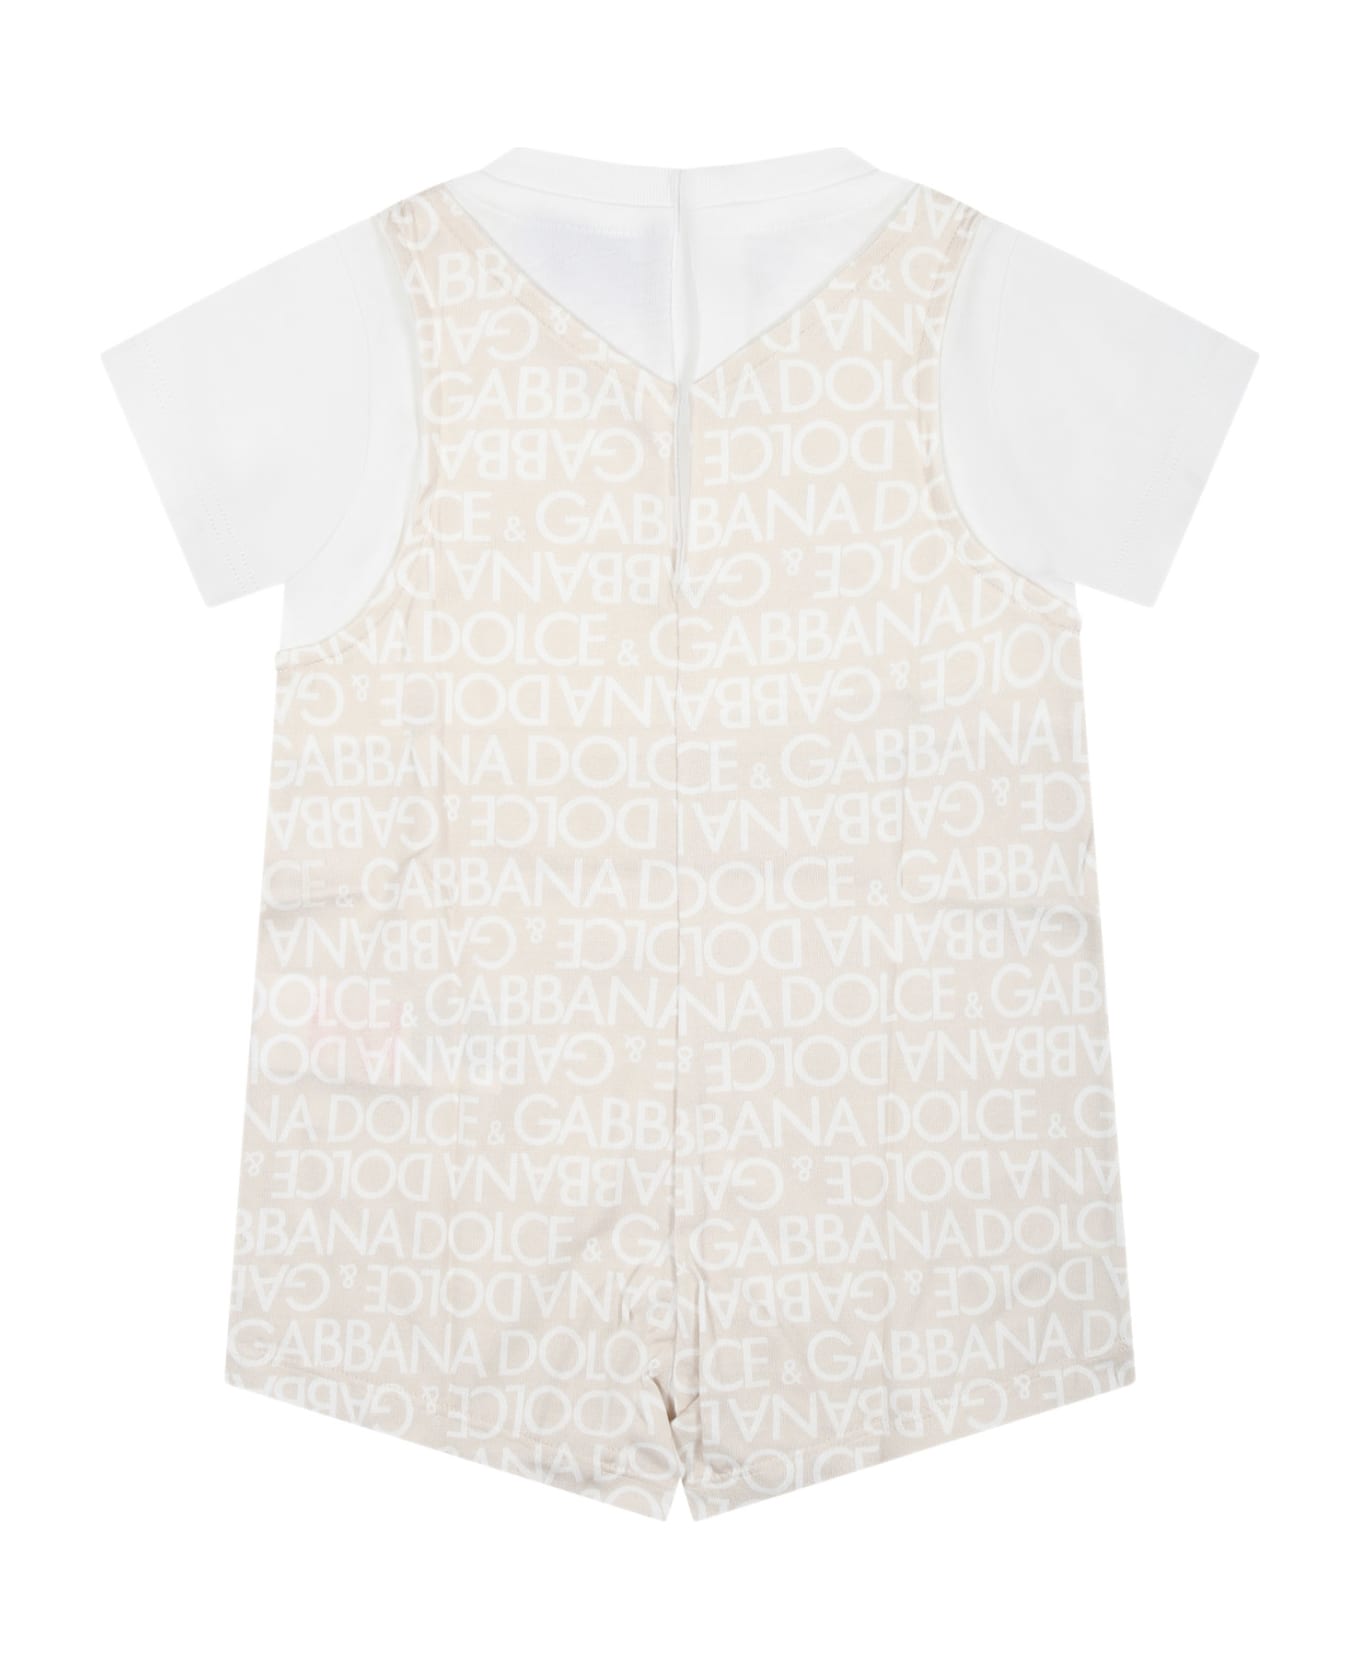 Dolce & Gabbana Beige Romper For Babies With Tiger And All-over Logo - Beige